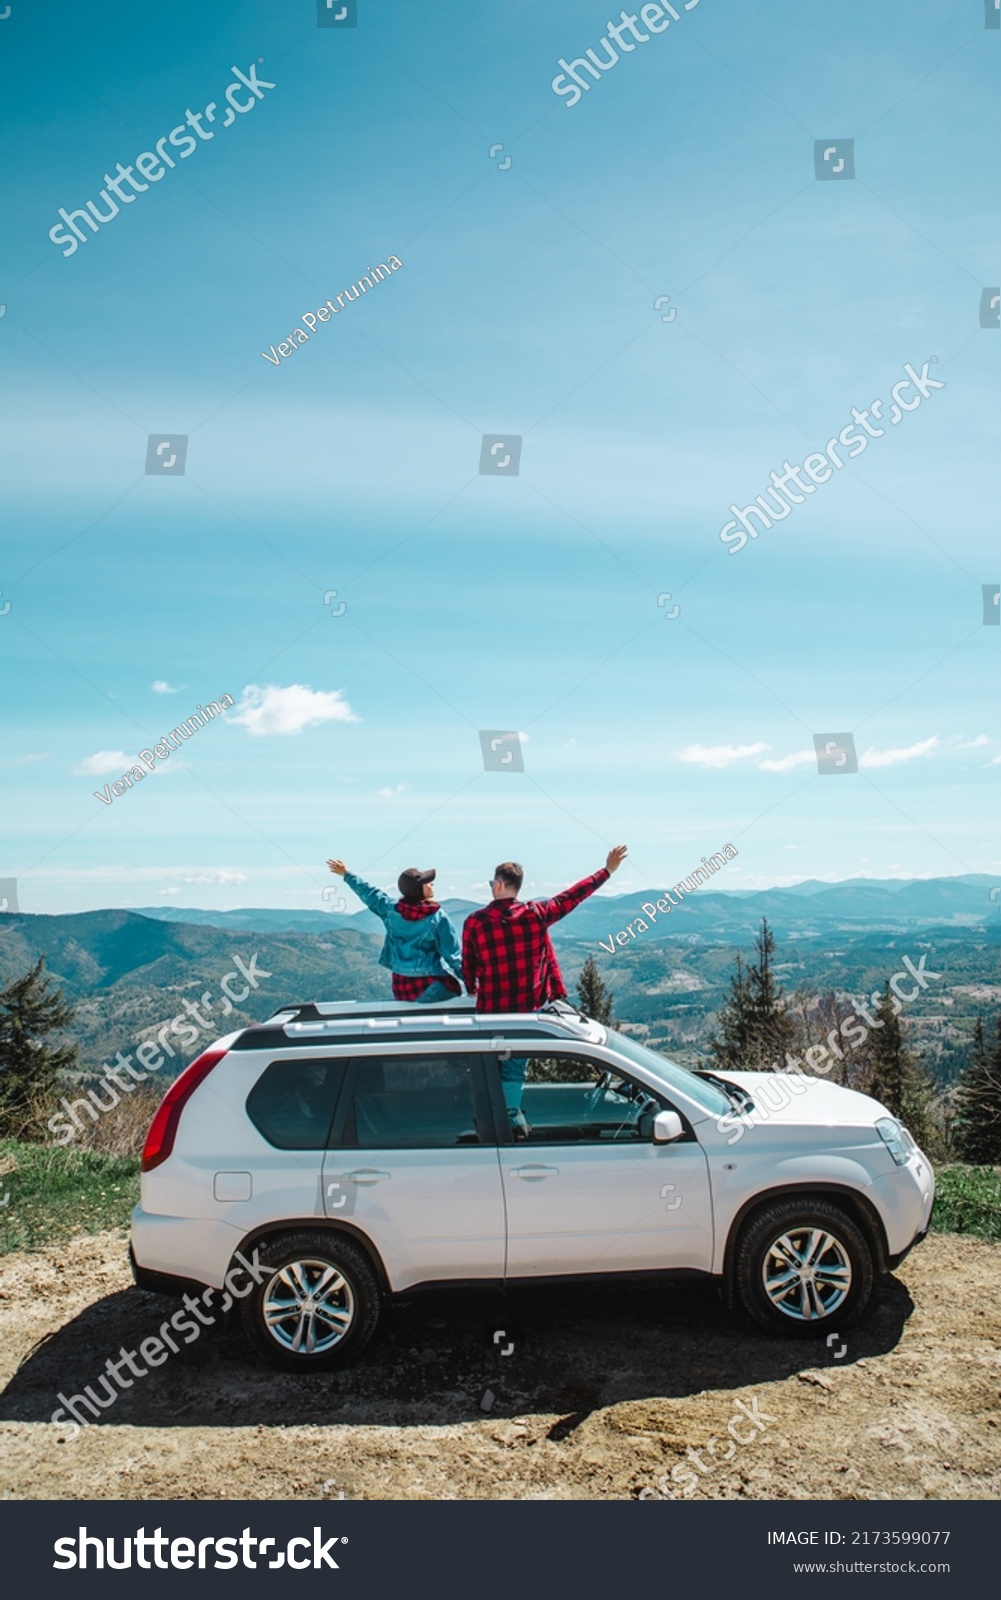 young woman sitting on the top of the suv car at mountain peak enjoying the landscape view at summer sunny day #2173599077